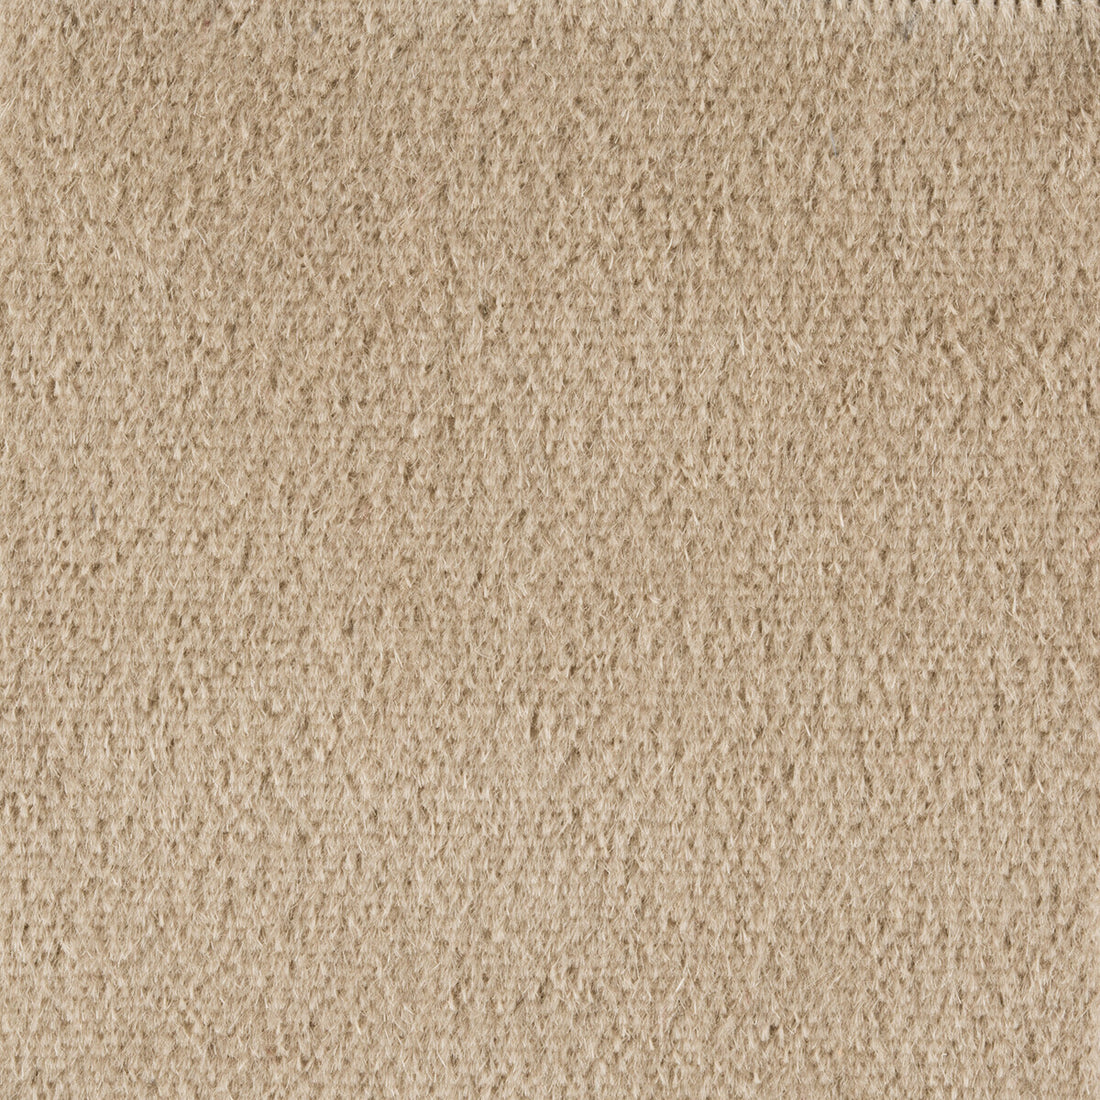 Plazzo Mohair fabric in pumice color - pattern 34259.931.0 - by Kravet Couture